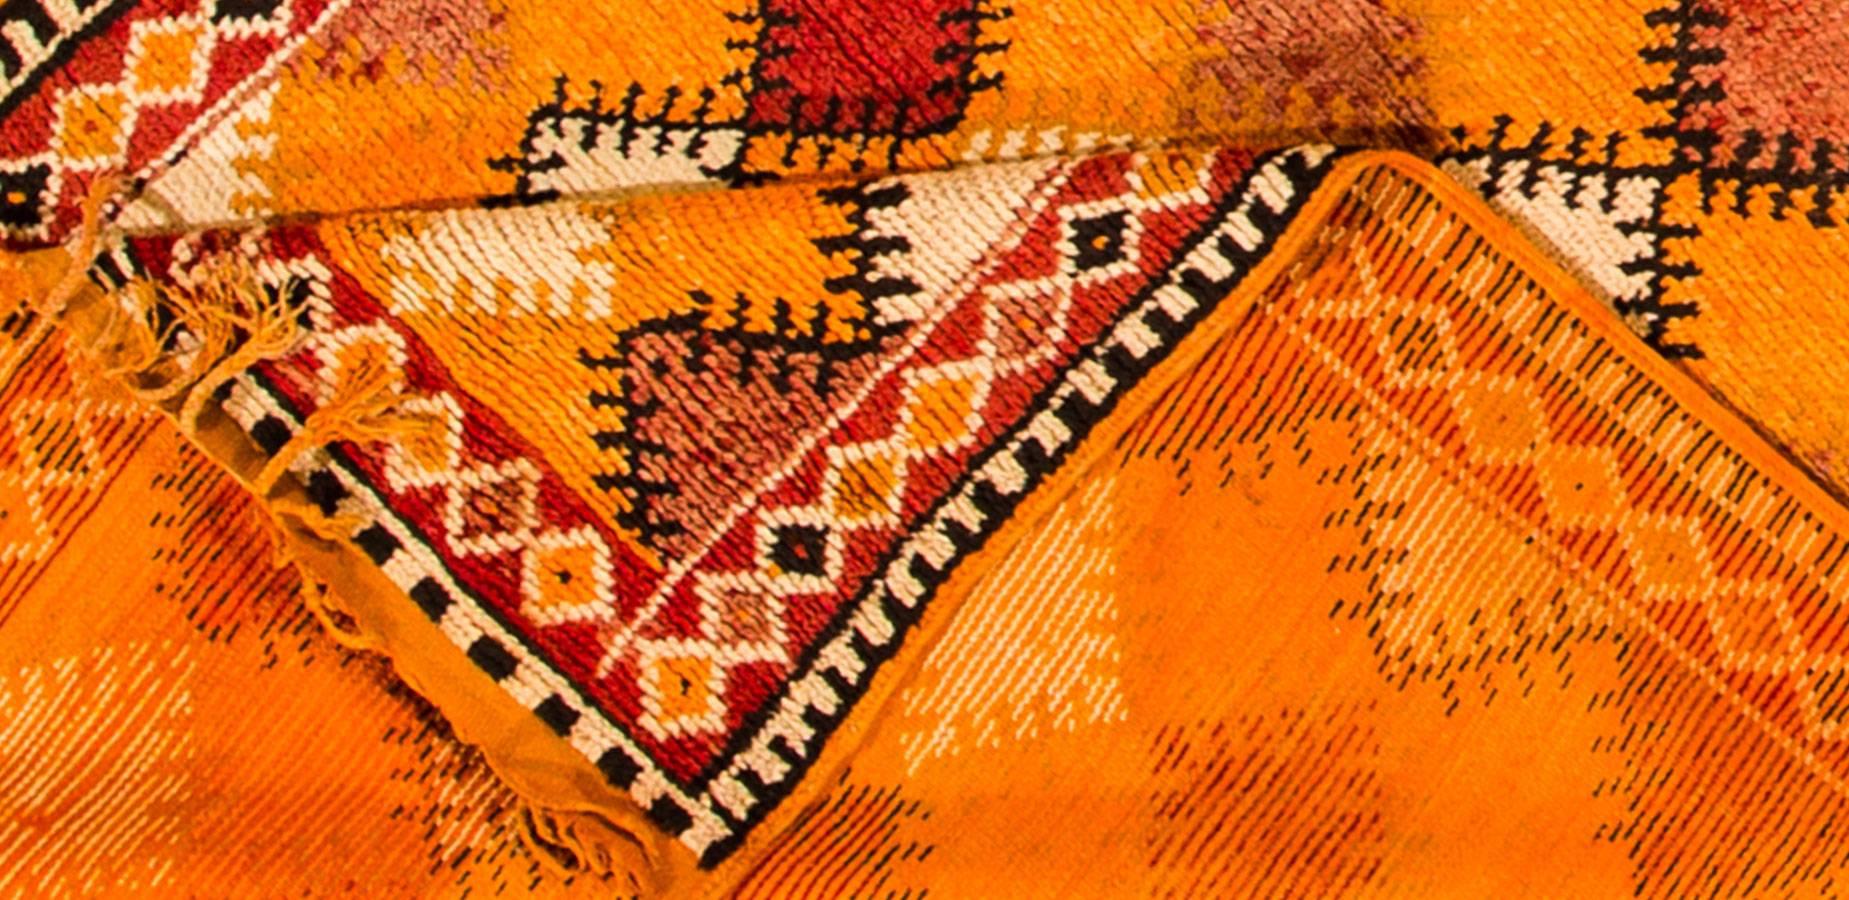 Beautiful Vintage hand-knotted Moroccan rug with a repeating geometric design on an orange field. Accents of yellow, red, and brown throughout the piece.

This rug measures 4'9